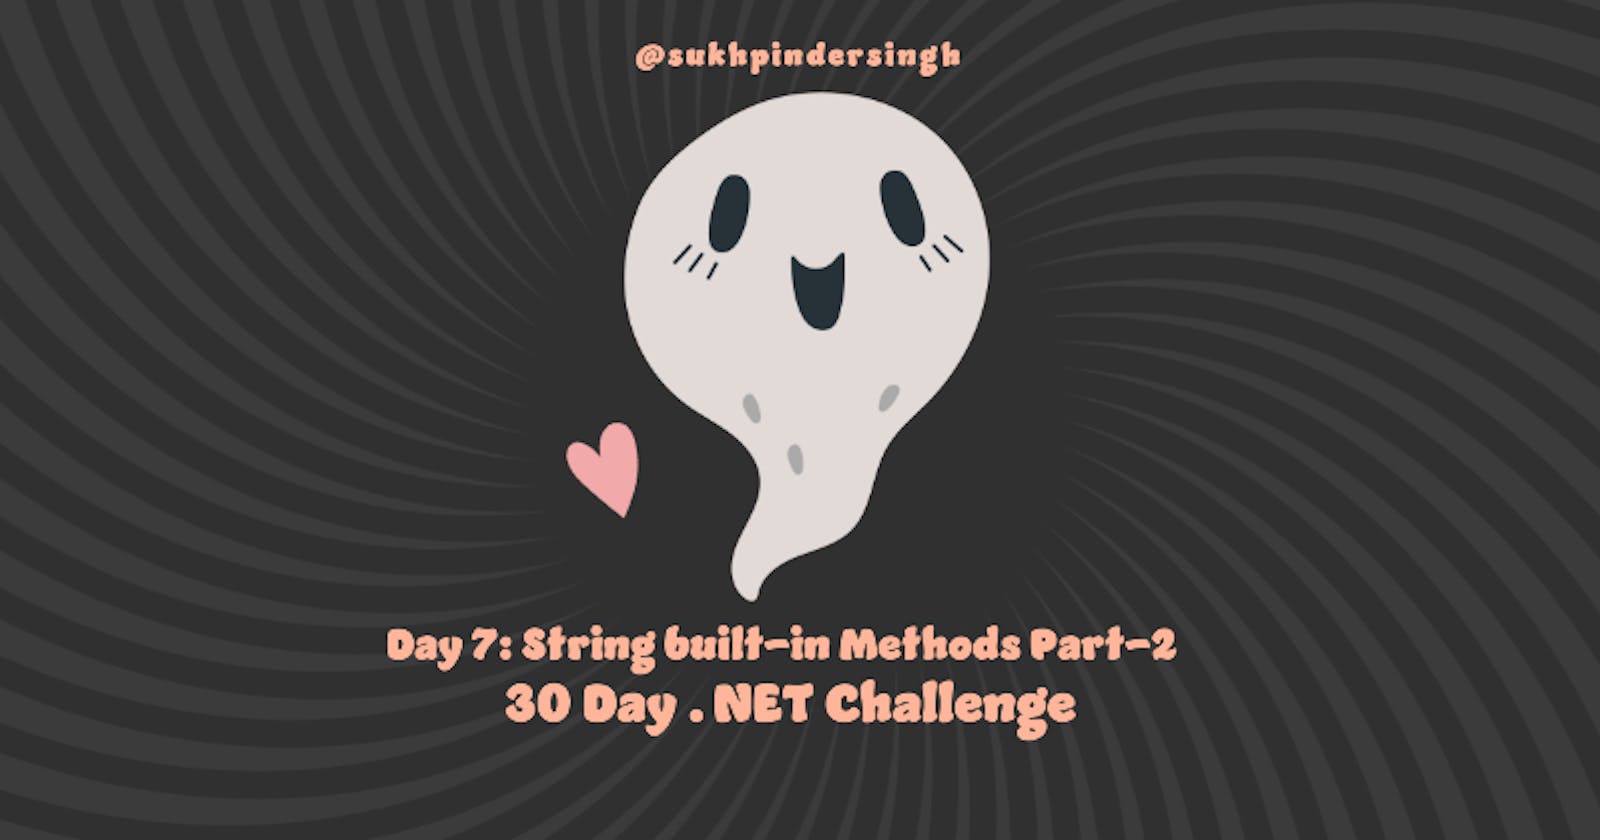 Day 7 of 30-Day .NET Challenge: String built-in Methods Part 2